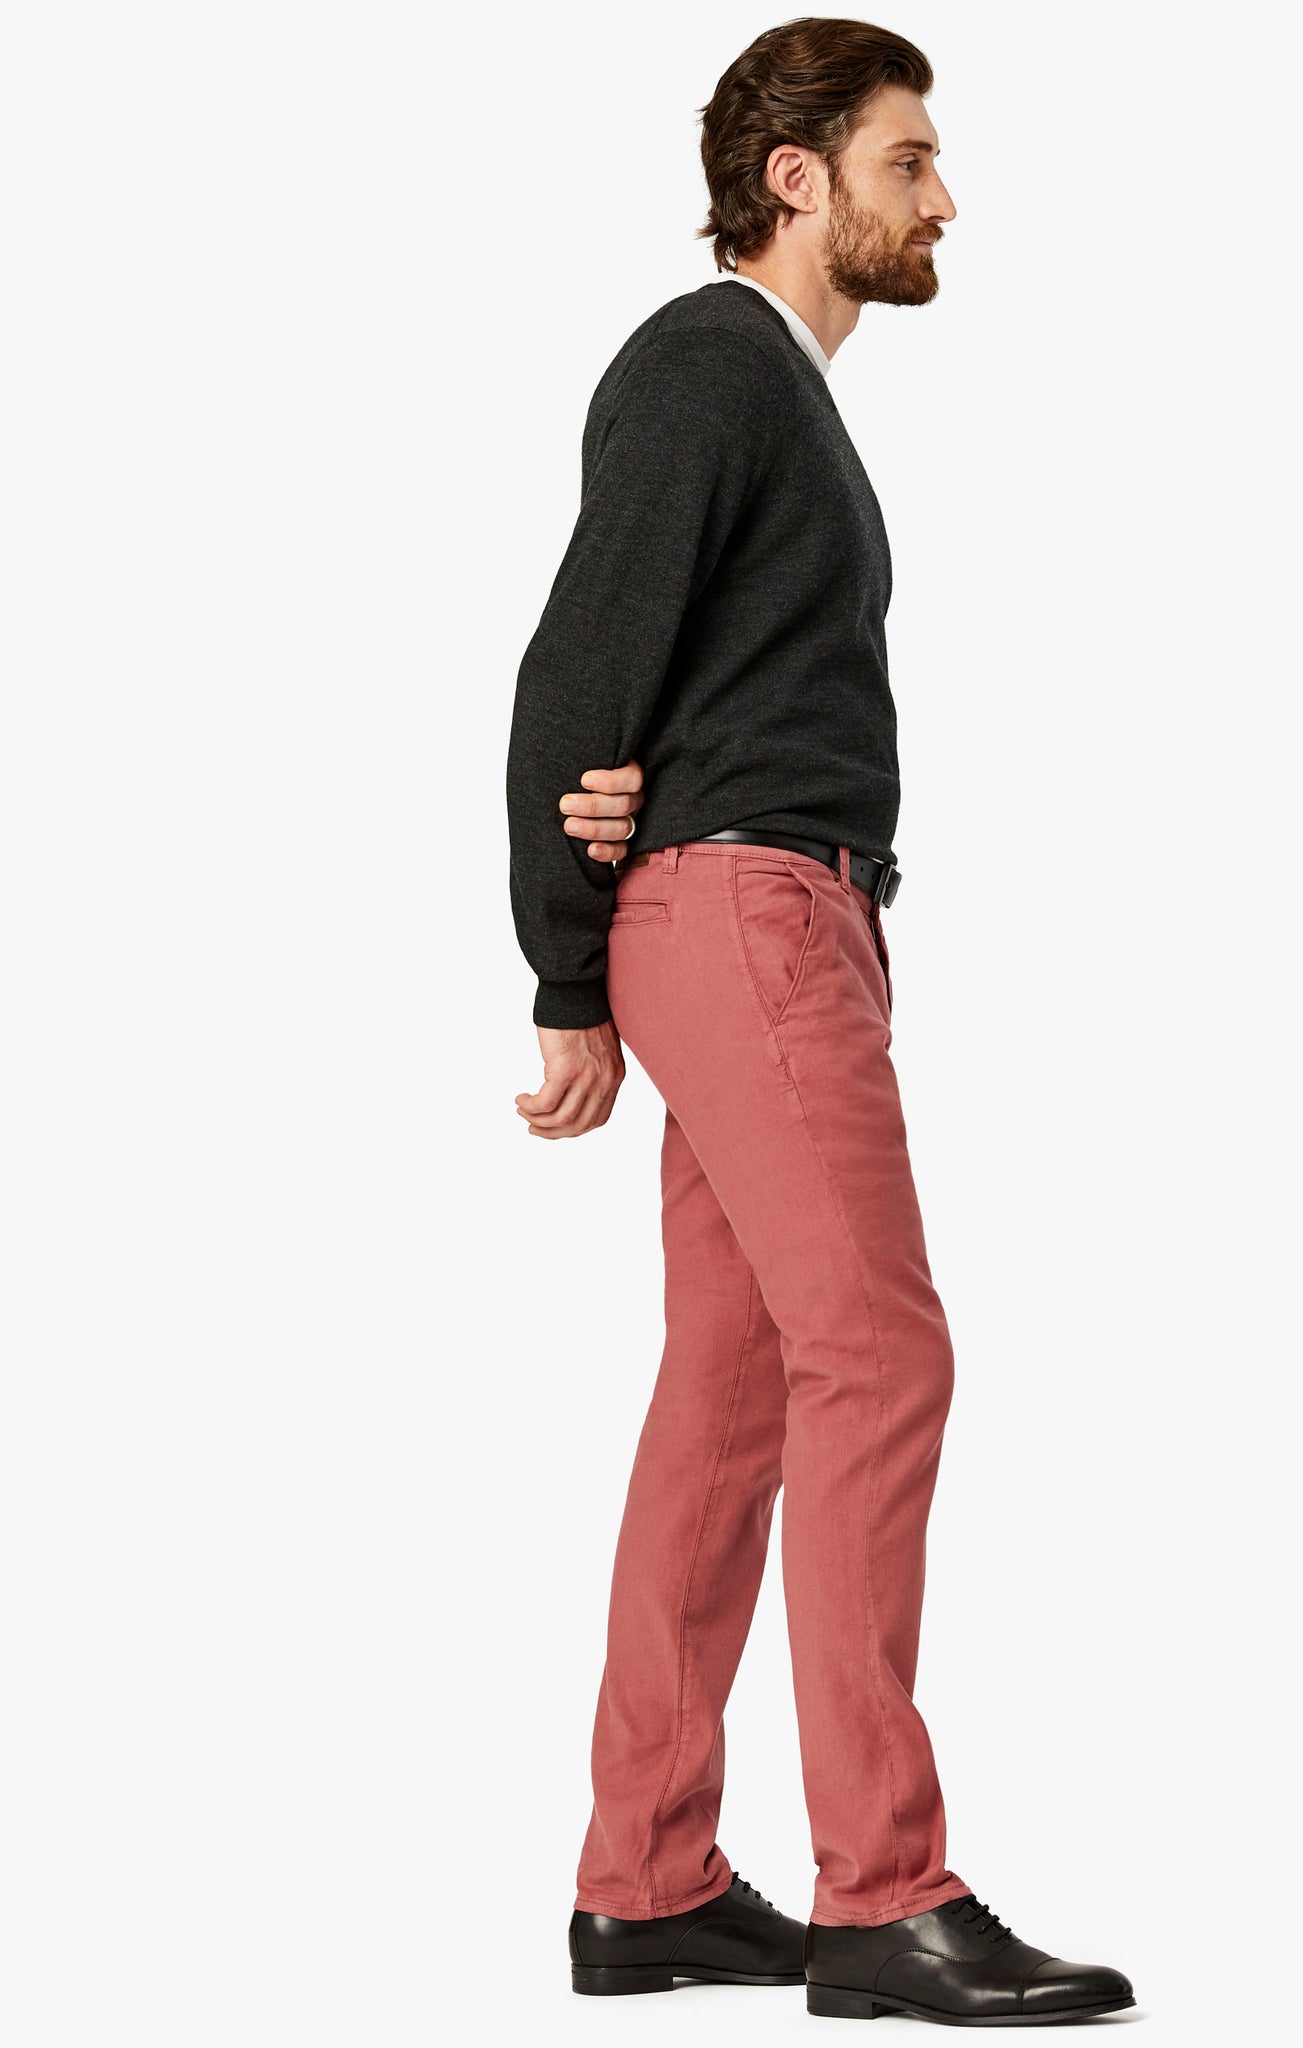 Naples Straight Leg Chino Pants in Coral Linen